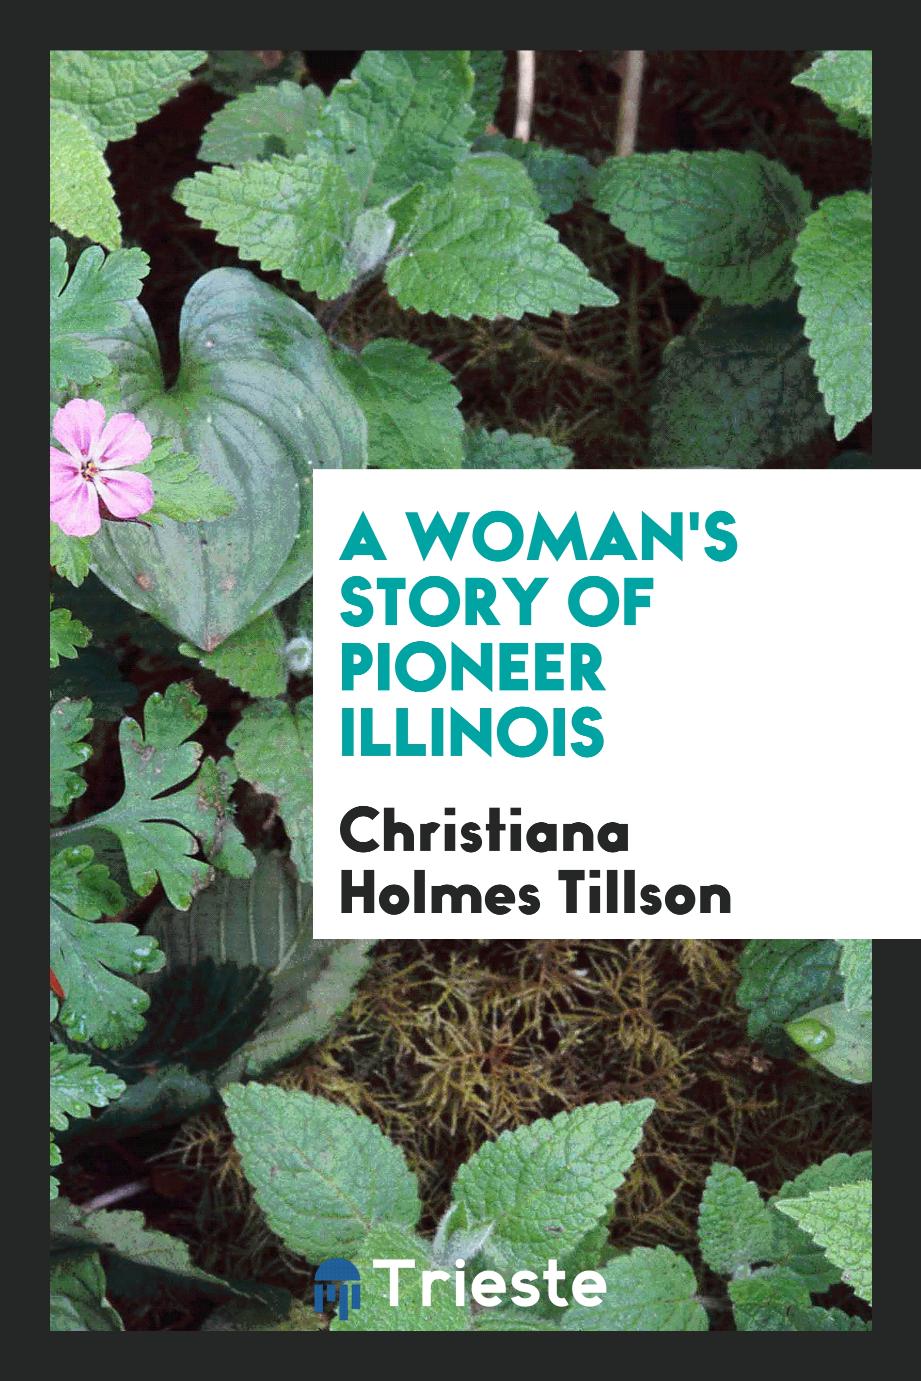 A woman's story of pioneer Illinois